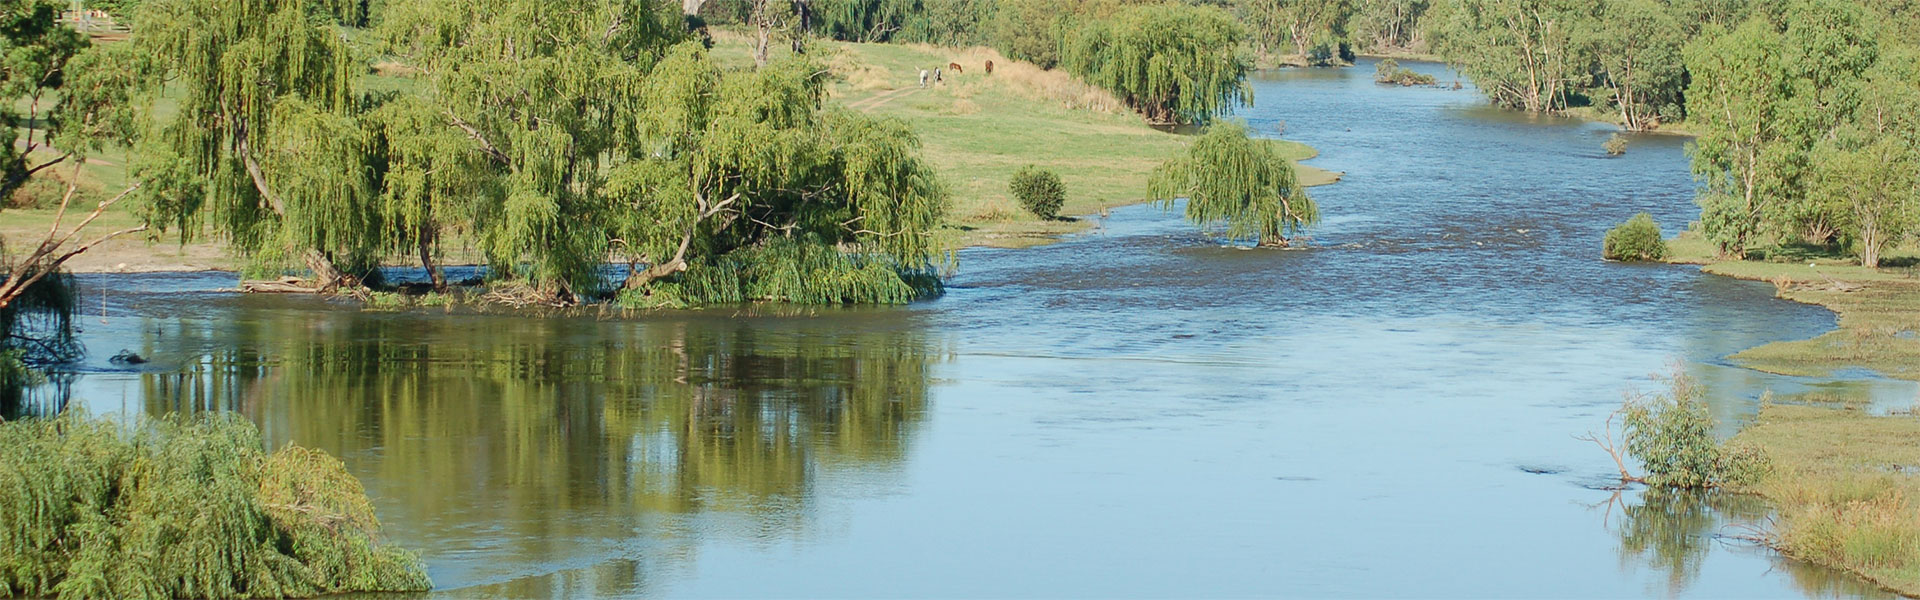 Activities and Attractions 1 | The River House Bingara